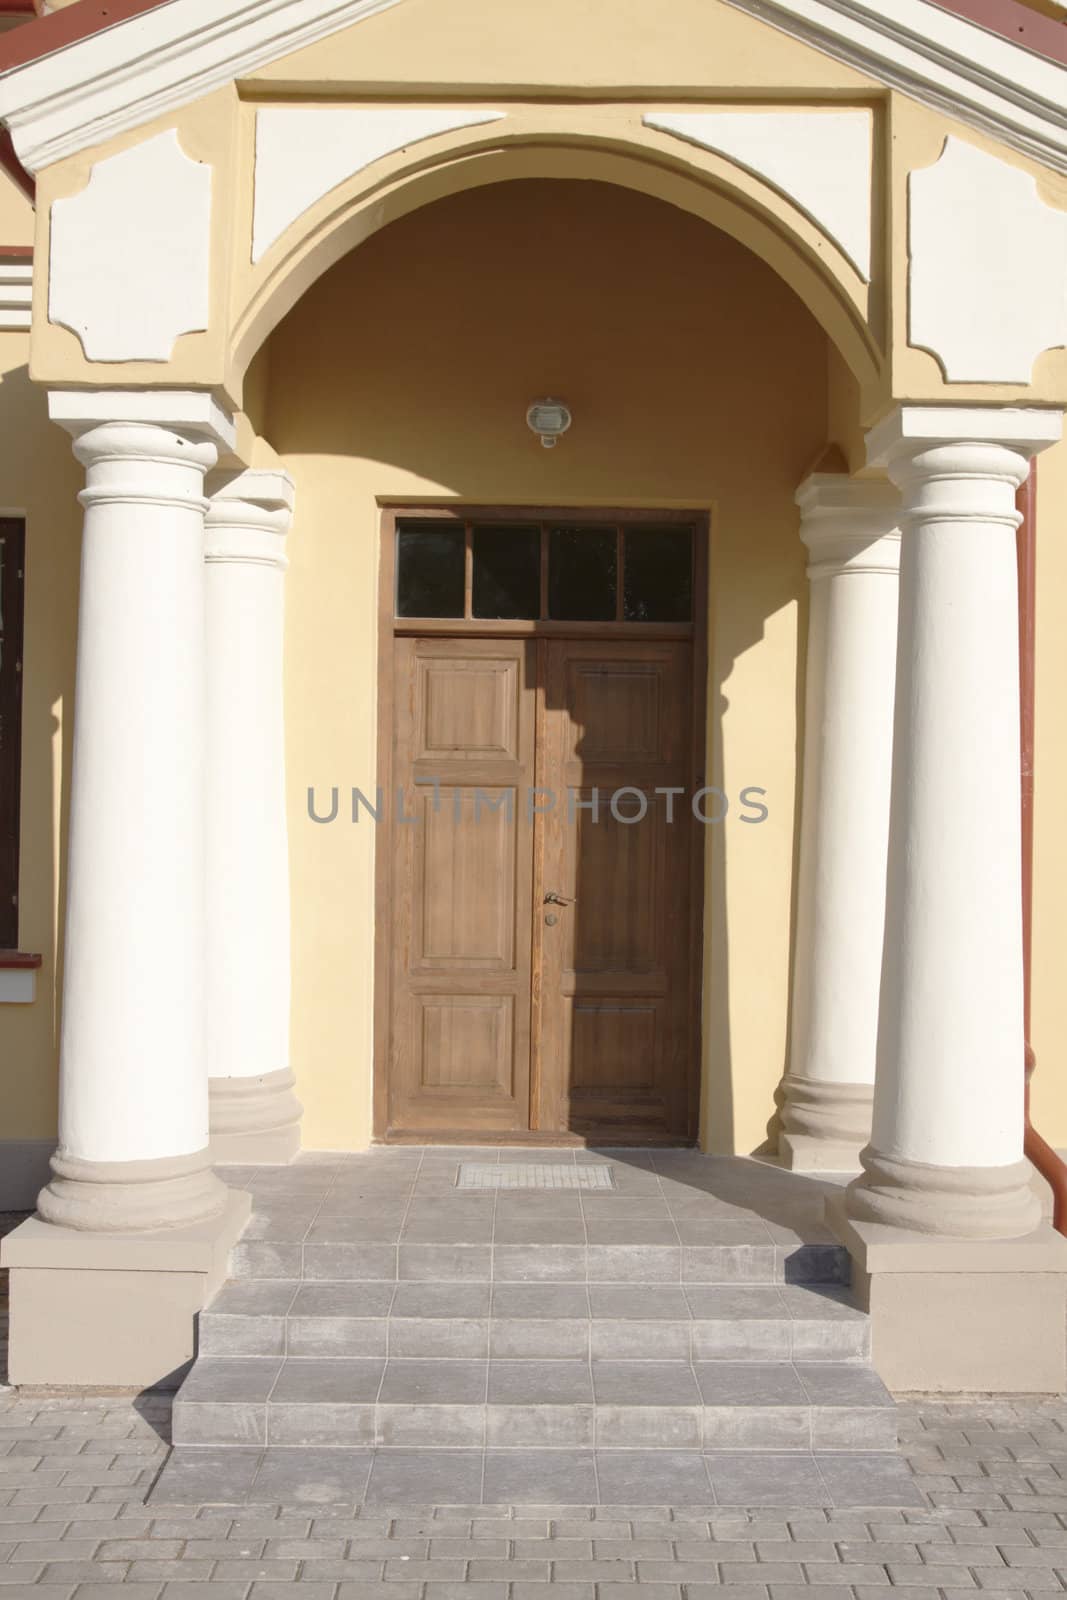 Architectural details to entrance of newly